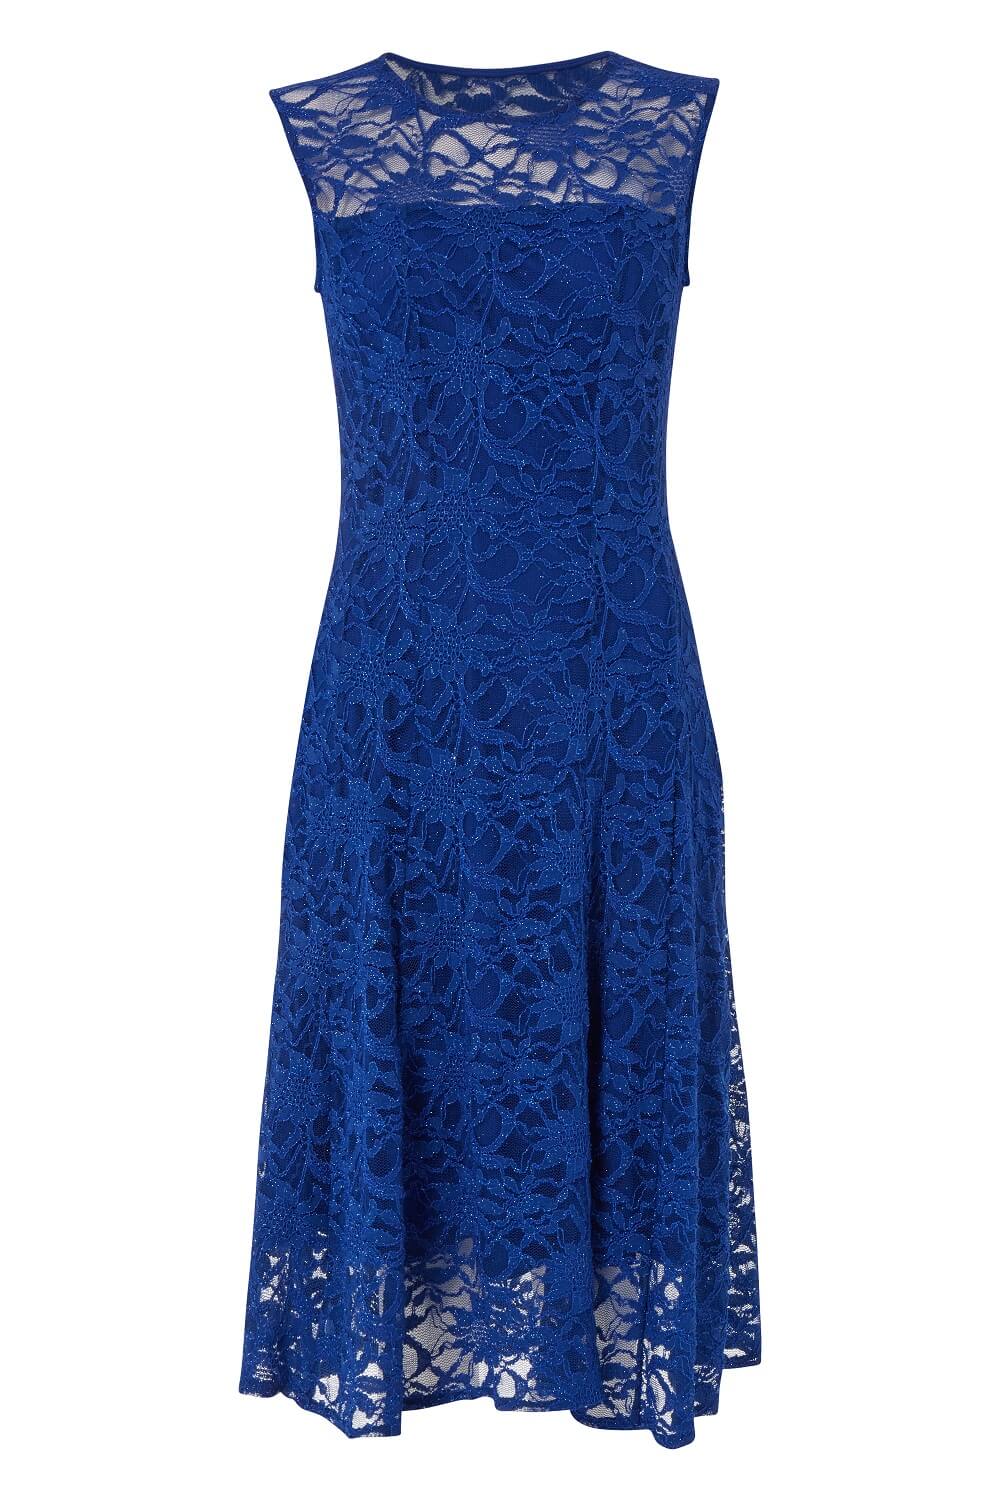 Glitter Lace Fit and Flare Dress in Royal Blue - Roman Originals UK